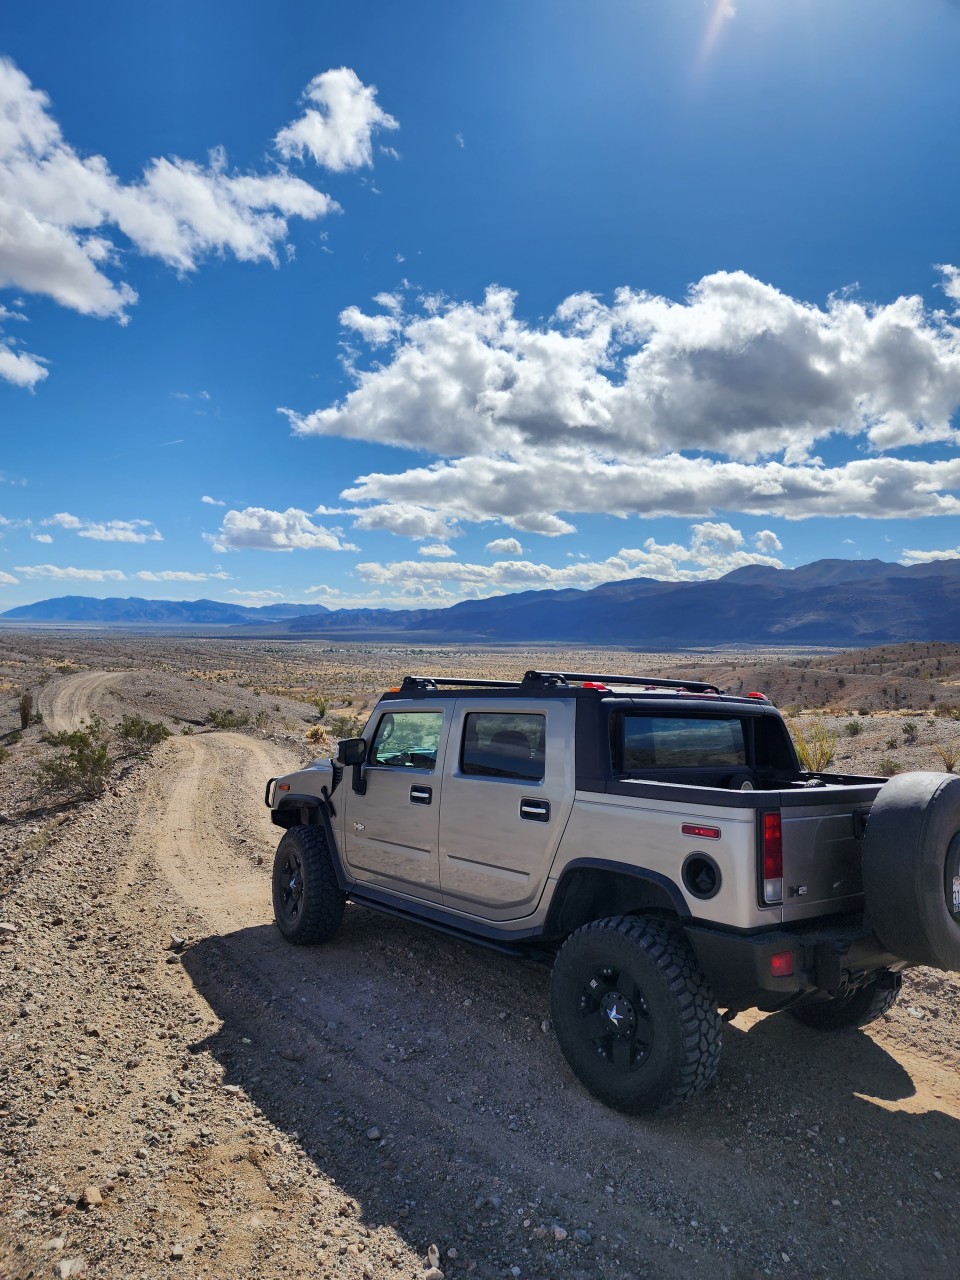 Doing some 4x4 trail  Scouting in Borrego Springs for the upcoming Borrego Springs Rally this spring 2023